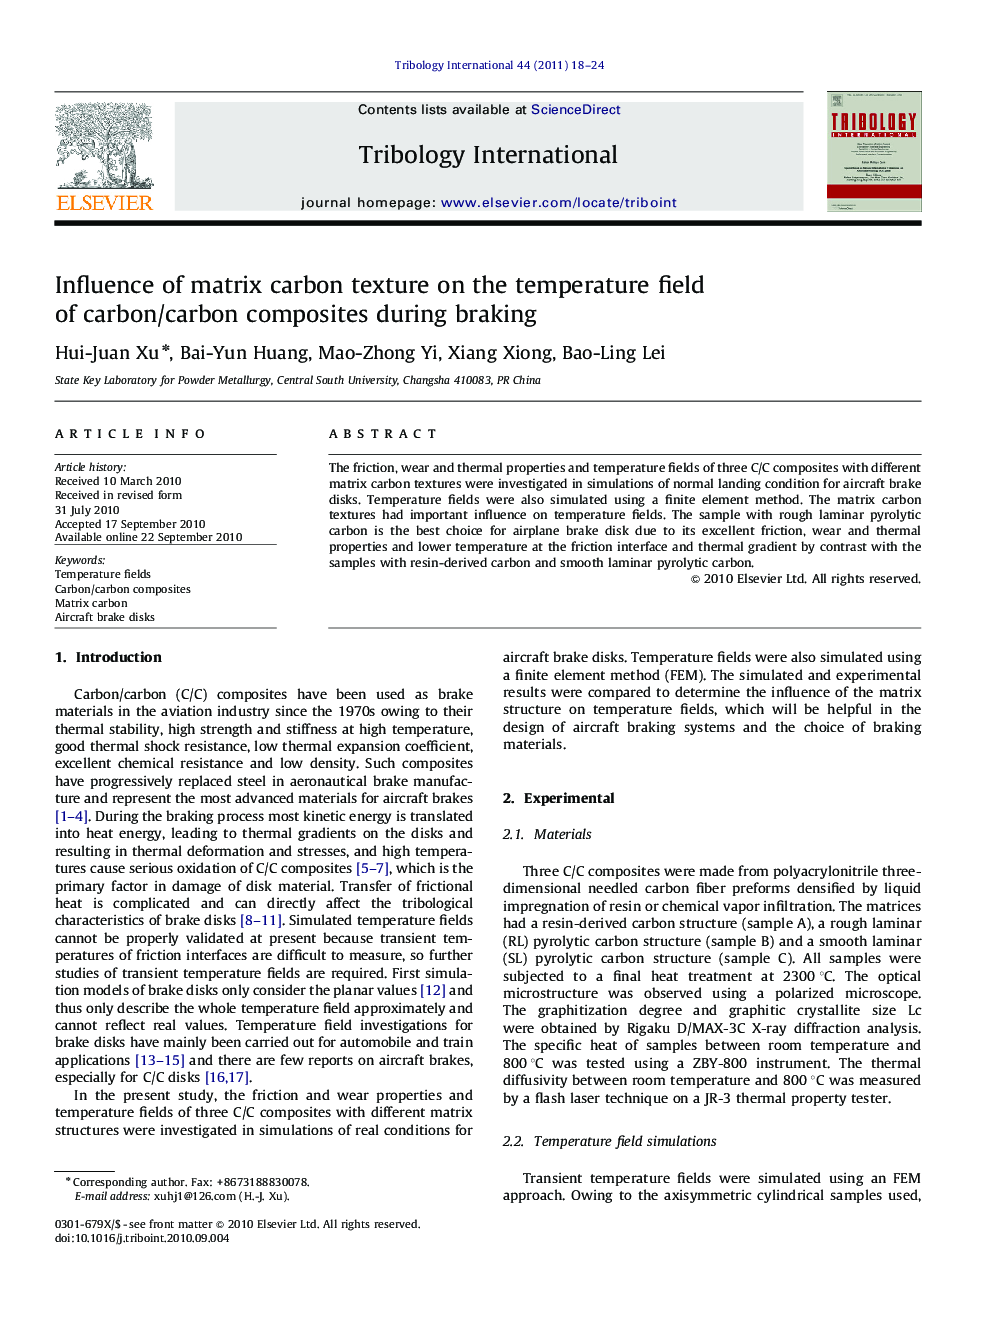 Influence of matrix carbon texture on the temperature field of carbon/carbon composites during braking